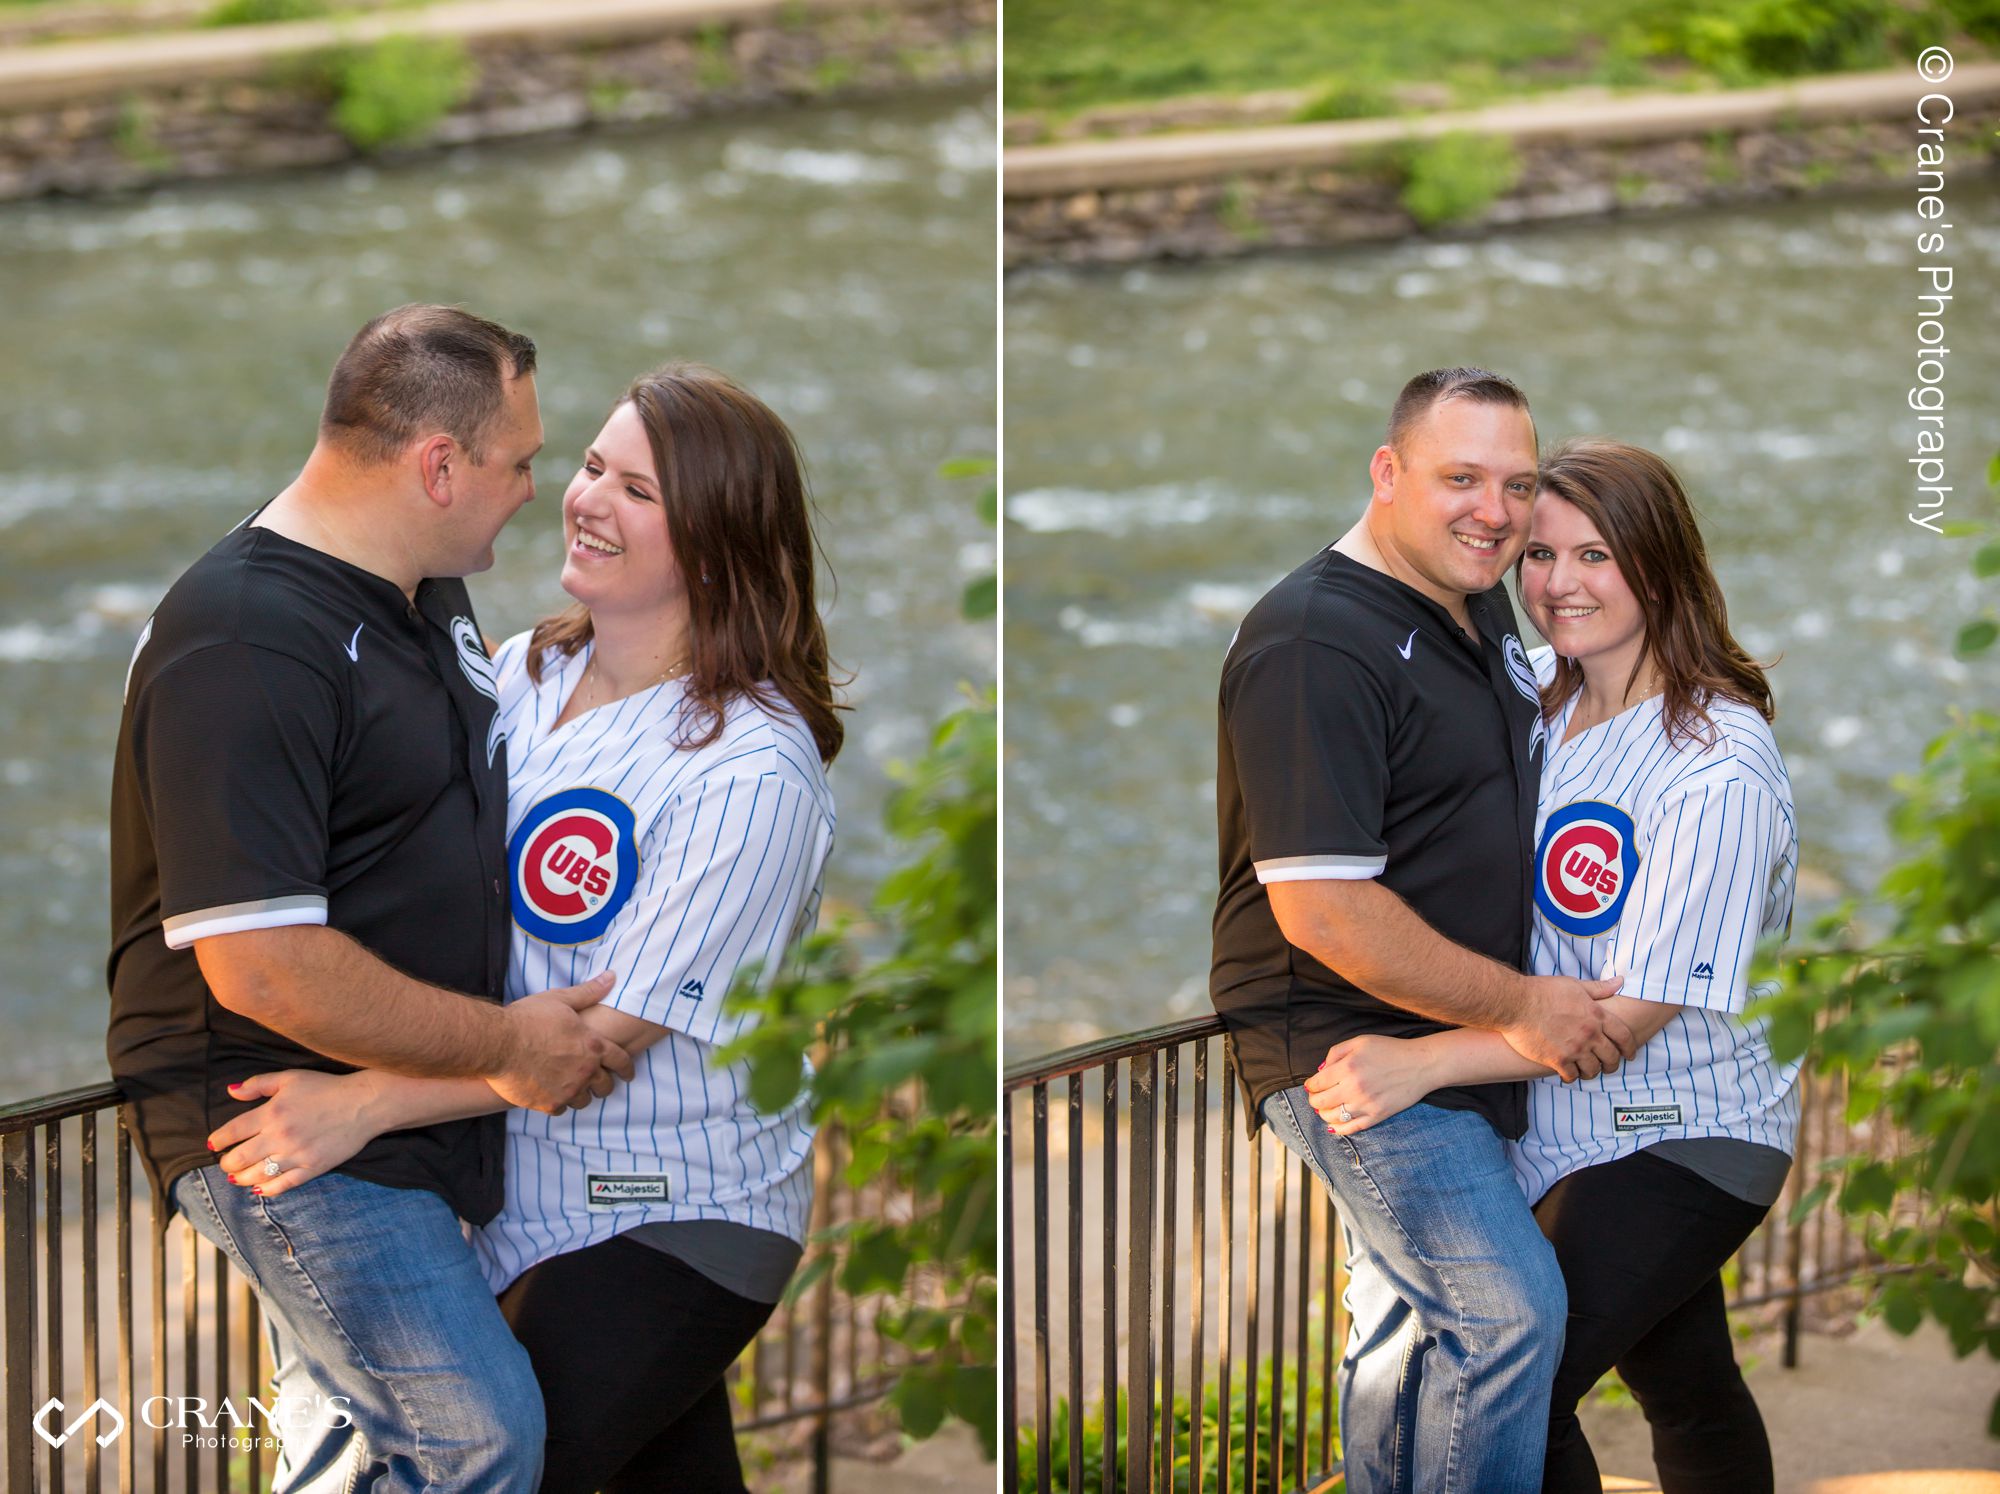 An engagement session photo at Naperville Riverwalk of a couple wearing sport jerseys.